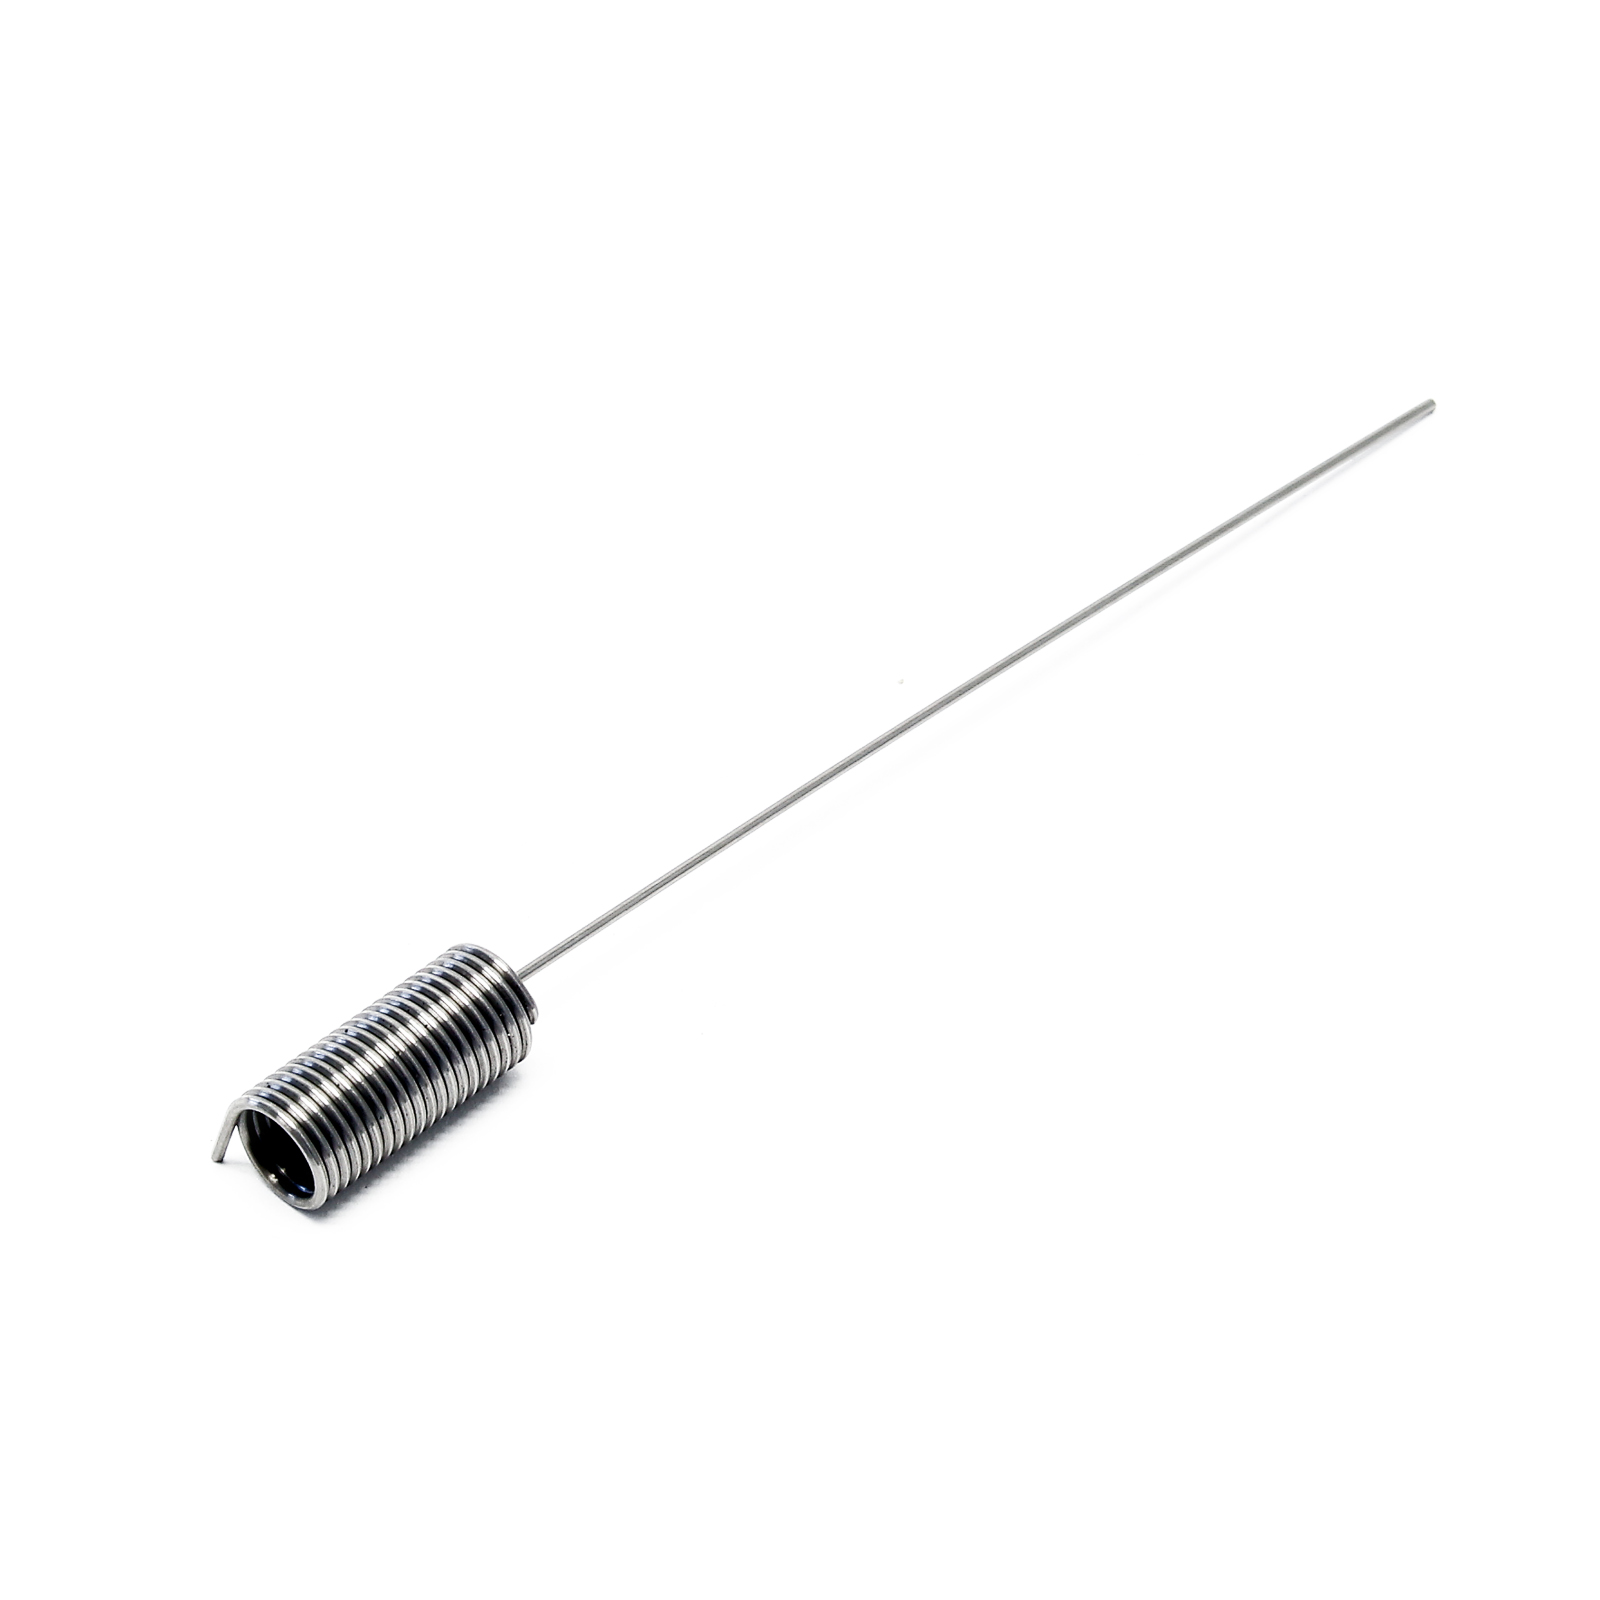 AOYUE Cleaning Needle for Desoldering Stations